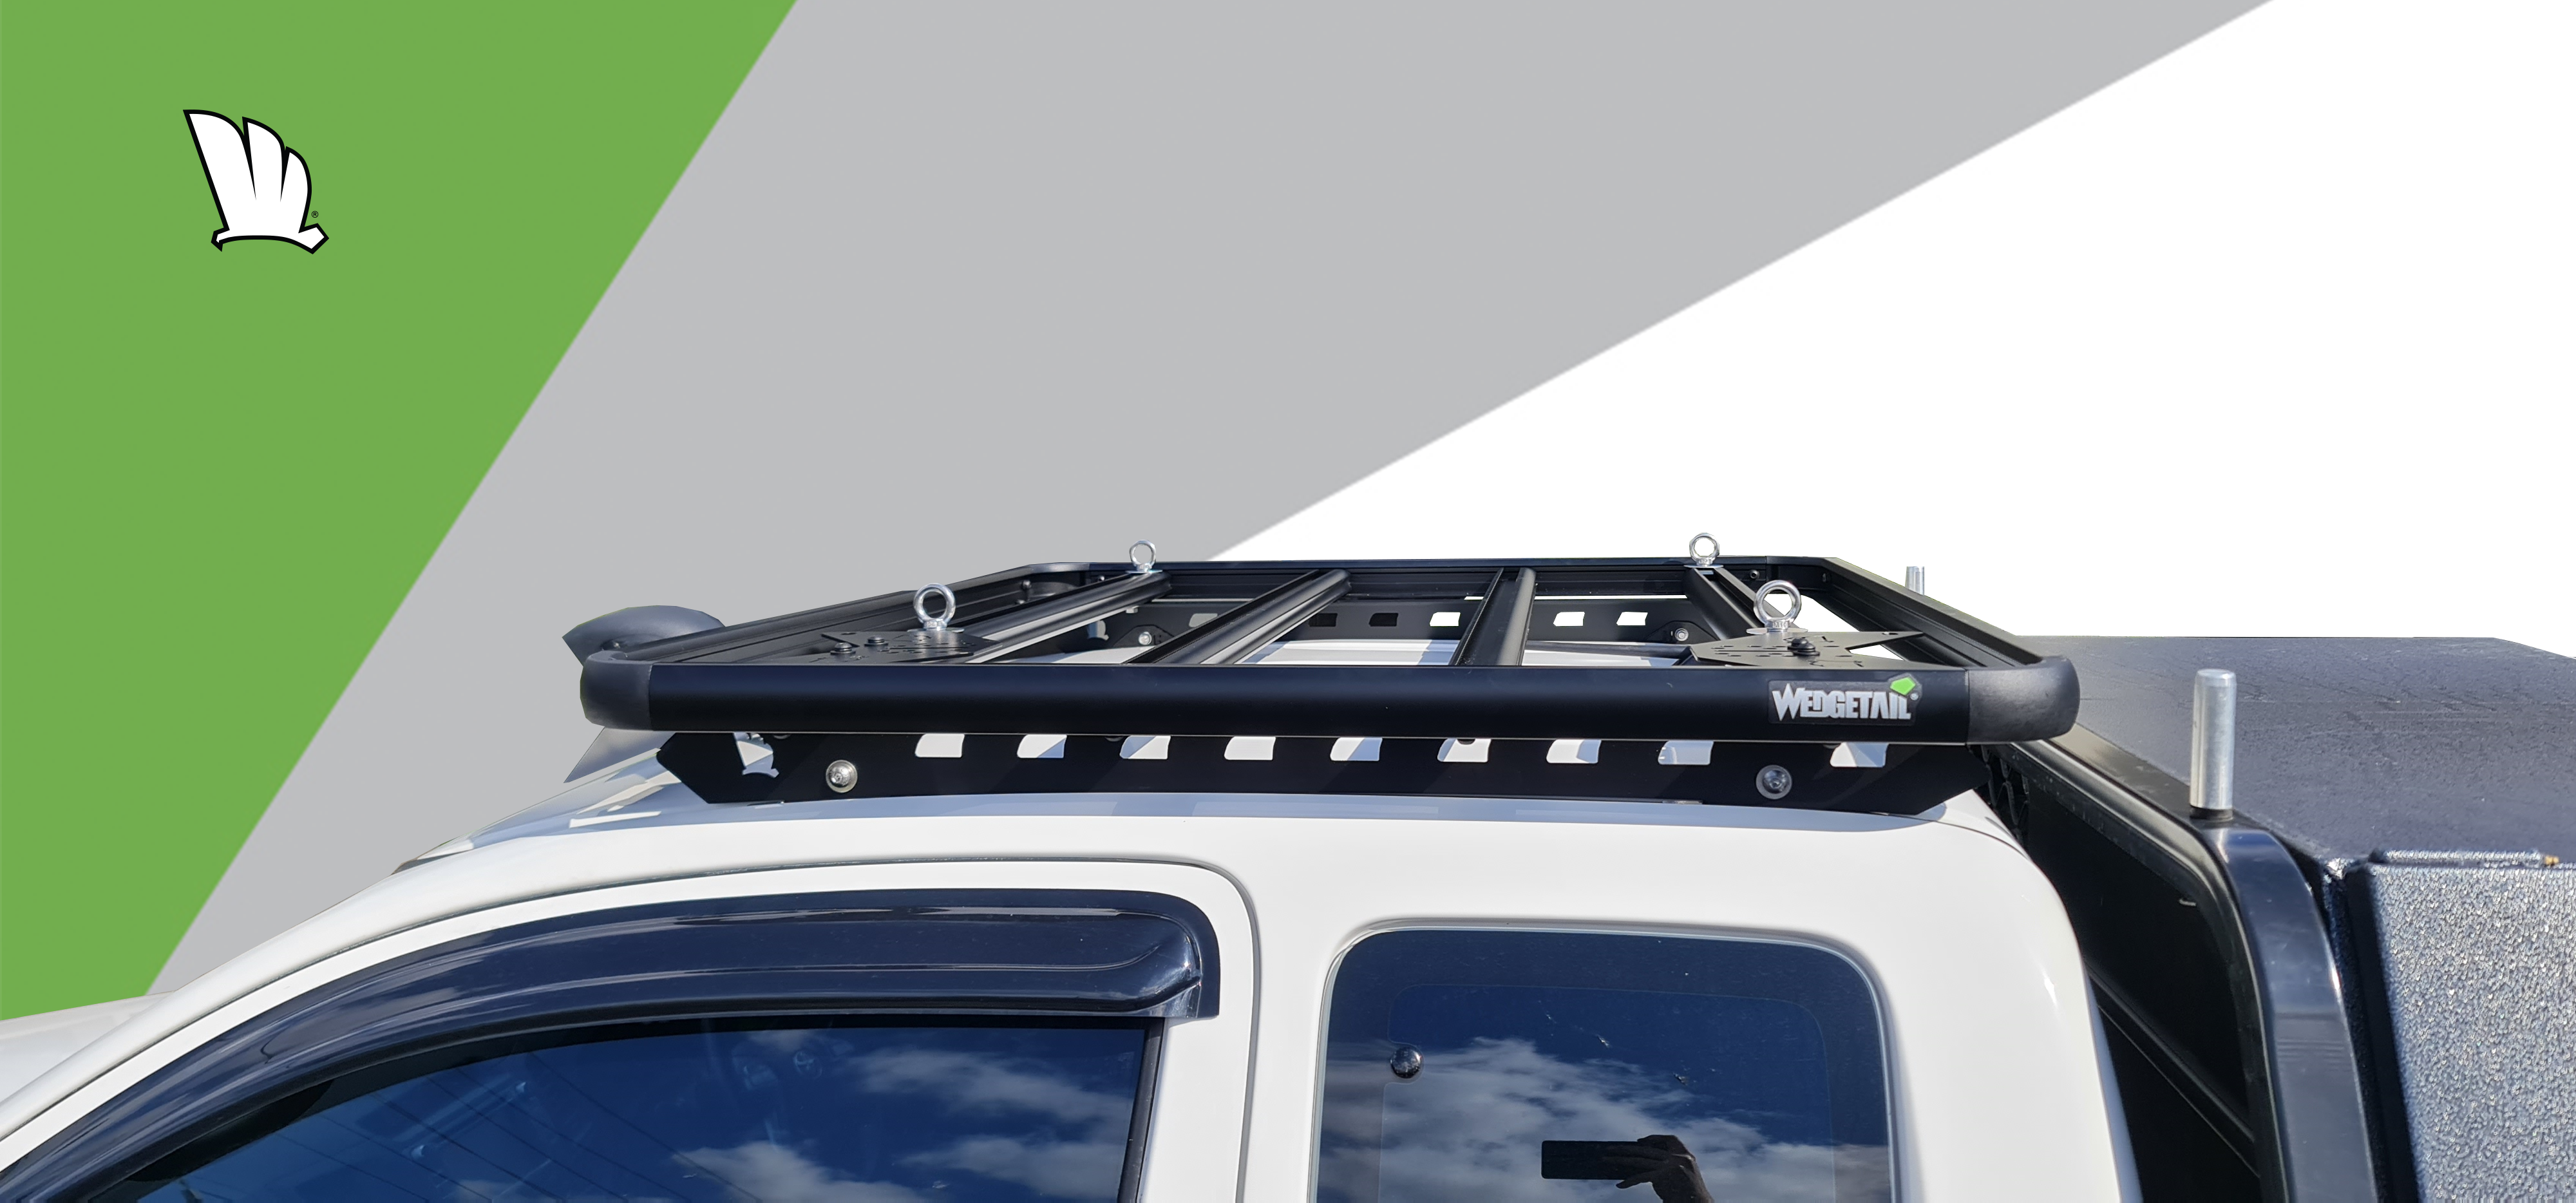 Modified 2015 HiLux with a Wedgetail roof rack installed on the dual cabin. Wedgetail rack has a lightbar fitted at front of platform frame. Hero image for page.